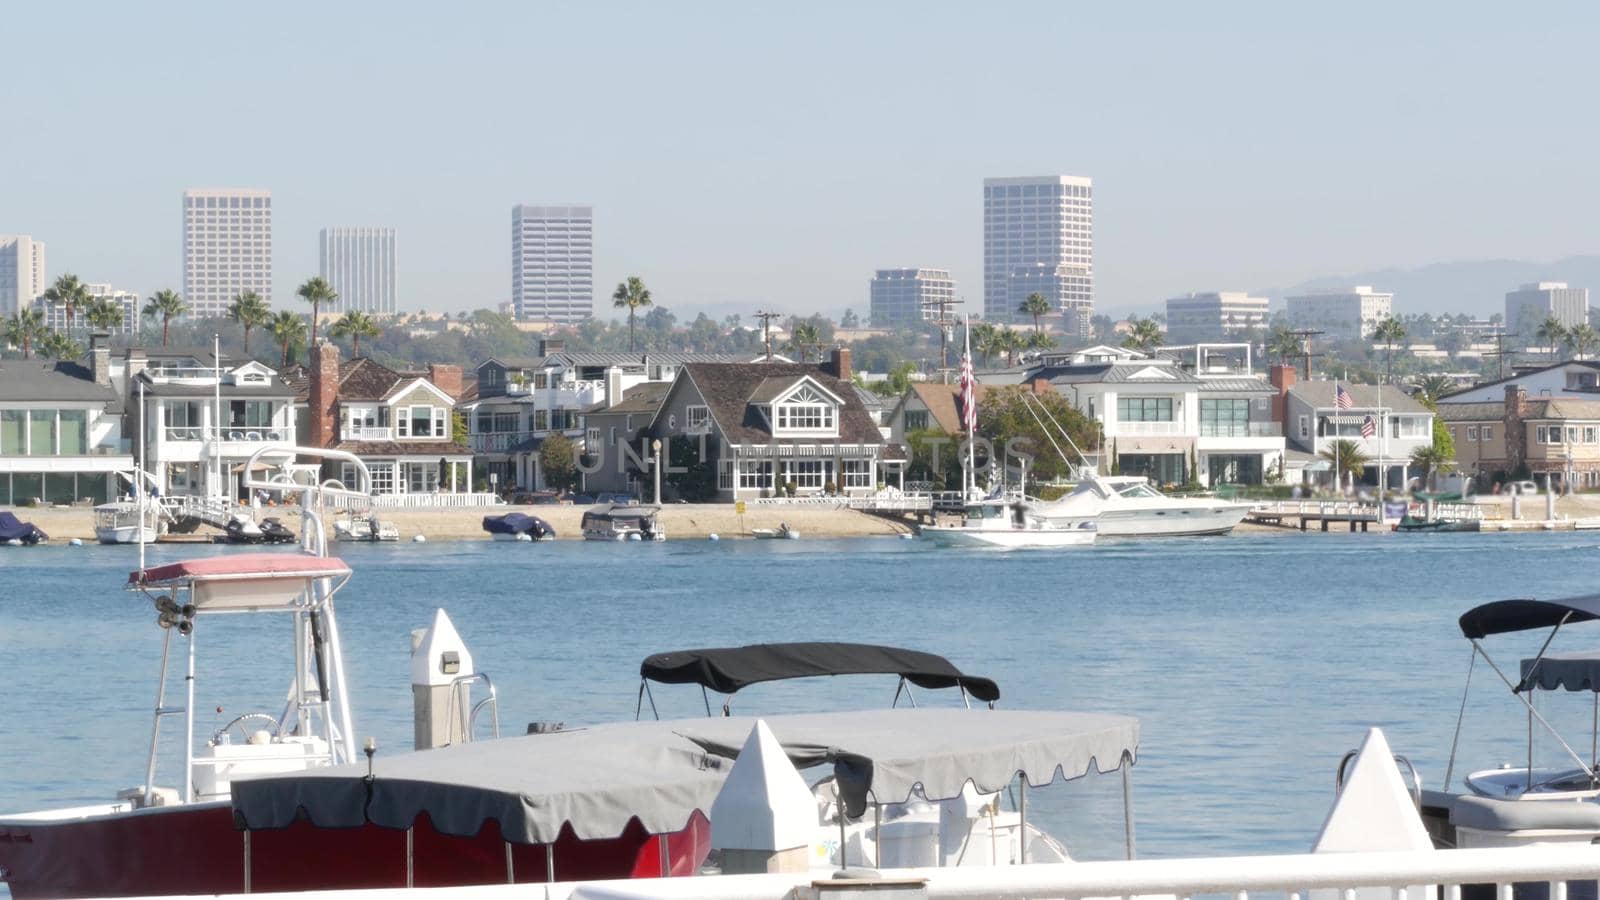 Newport beach harbor, weekend marina resort with yachts and sailboats, Pacific Coast, California, USA. Waterfront luxury suburb real estate in Orange County. Expensive beachfront holiday destination by DogoraSun